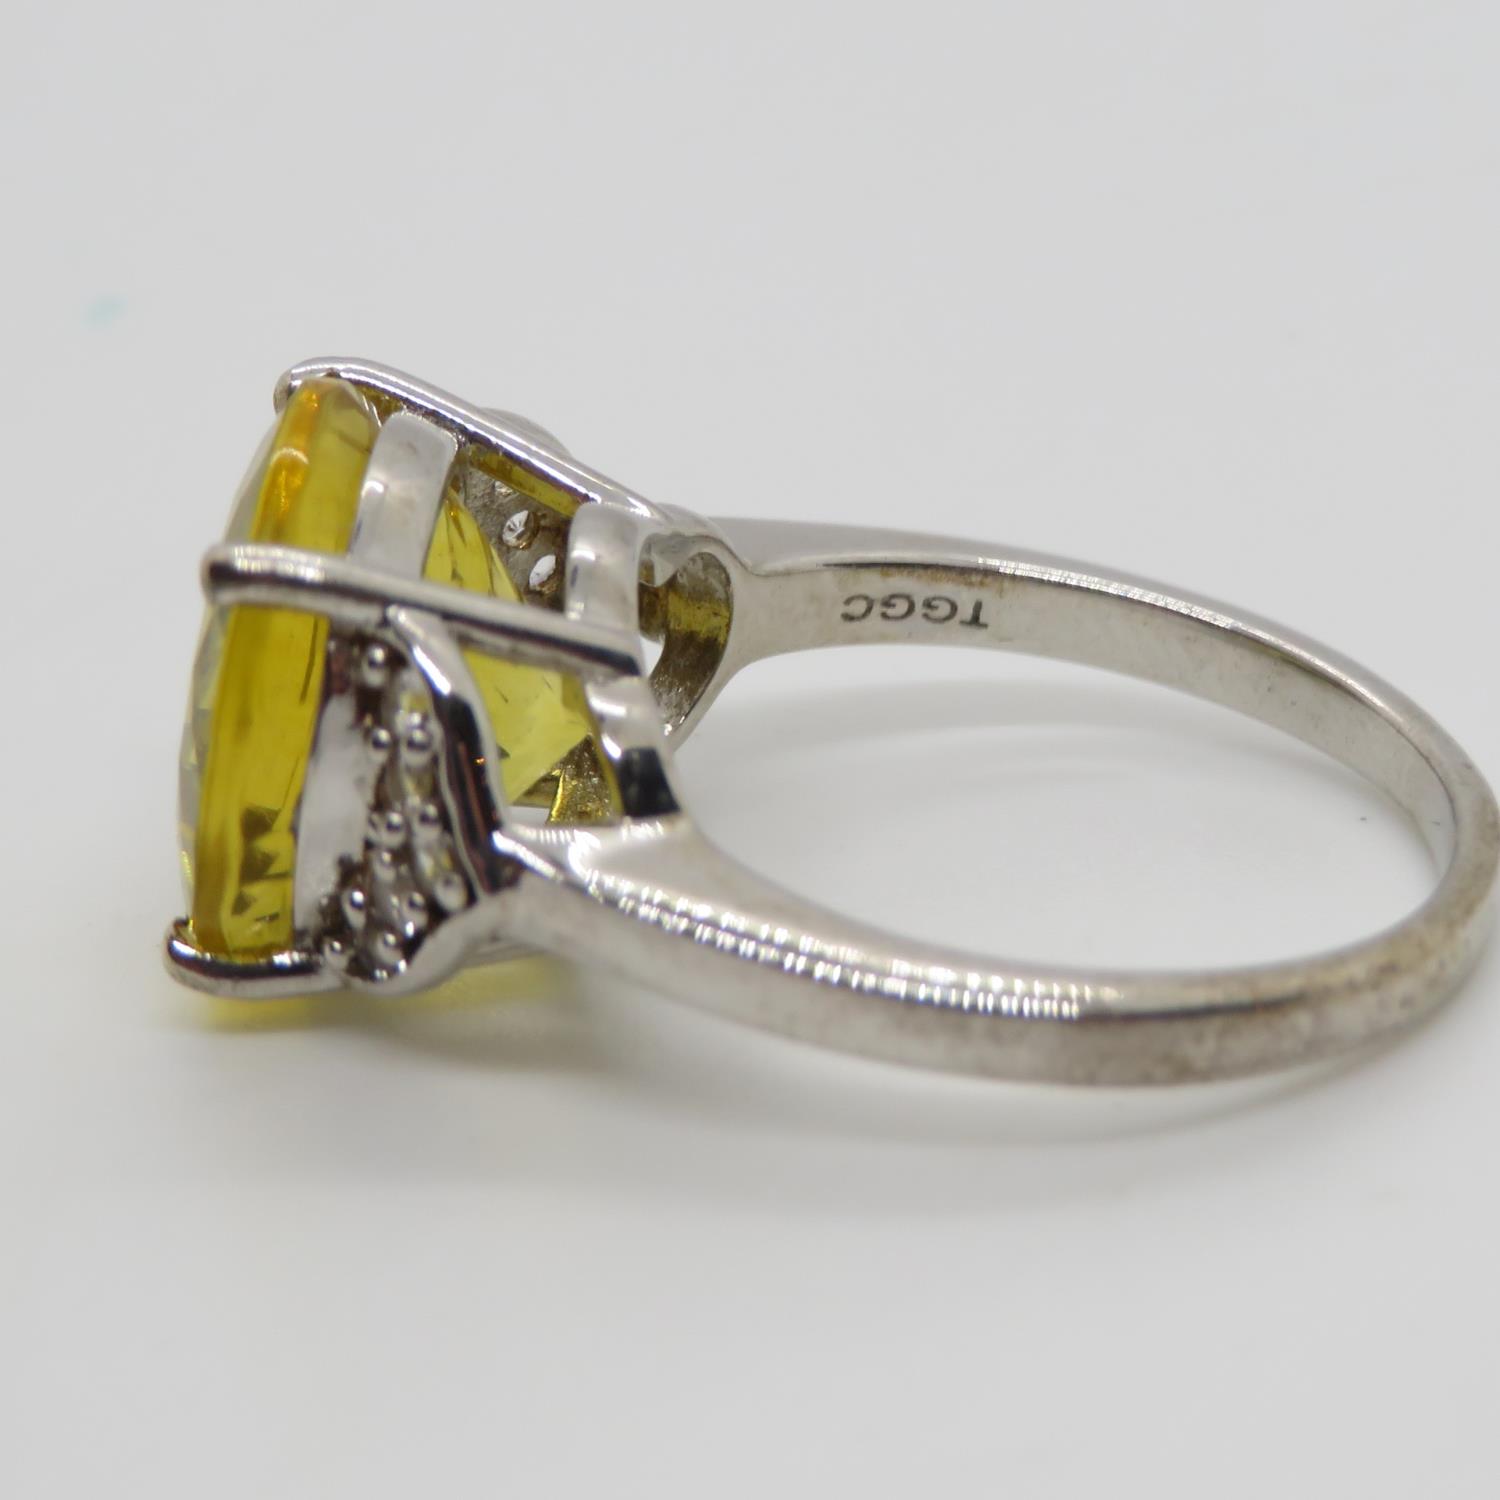 Golden Flourite and White Topaz Silver Ring Size P - Image 2 of 3